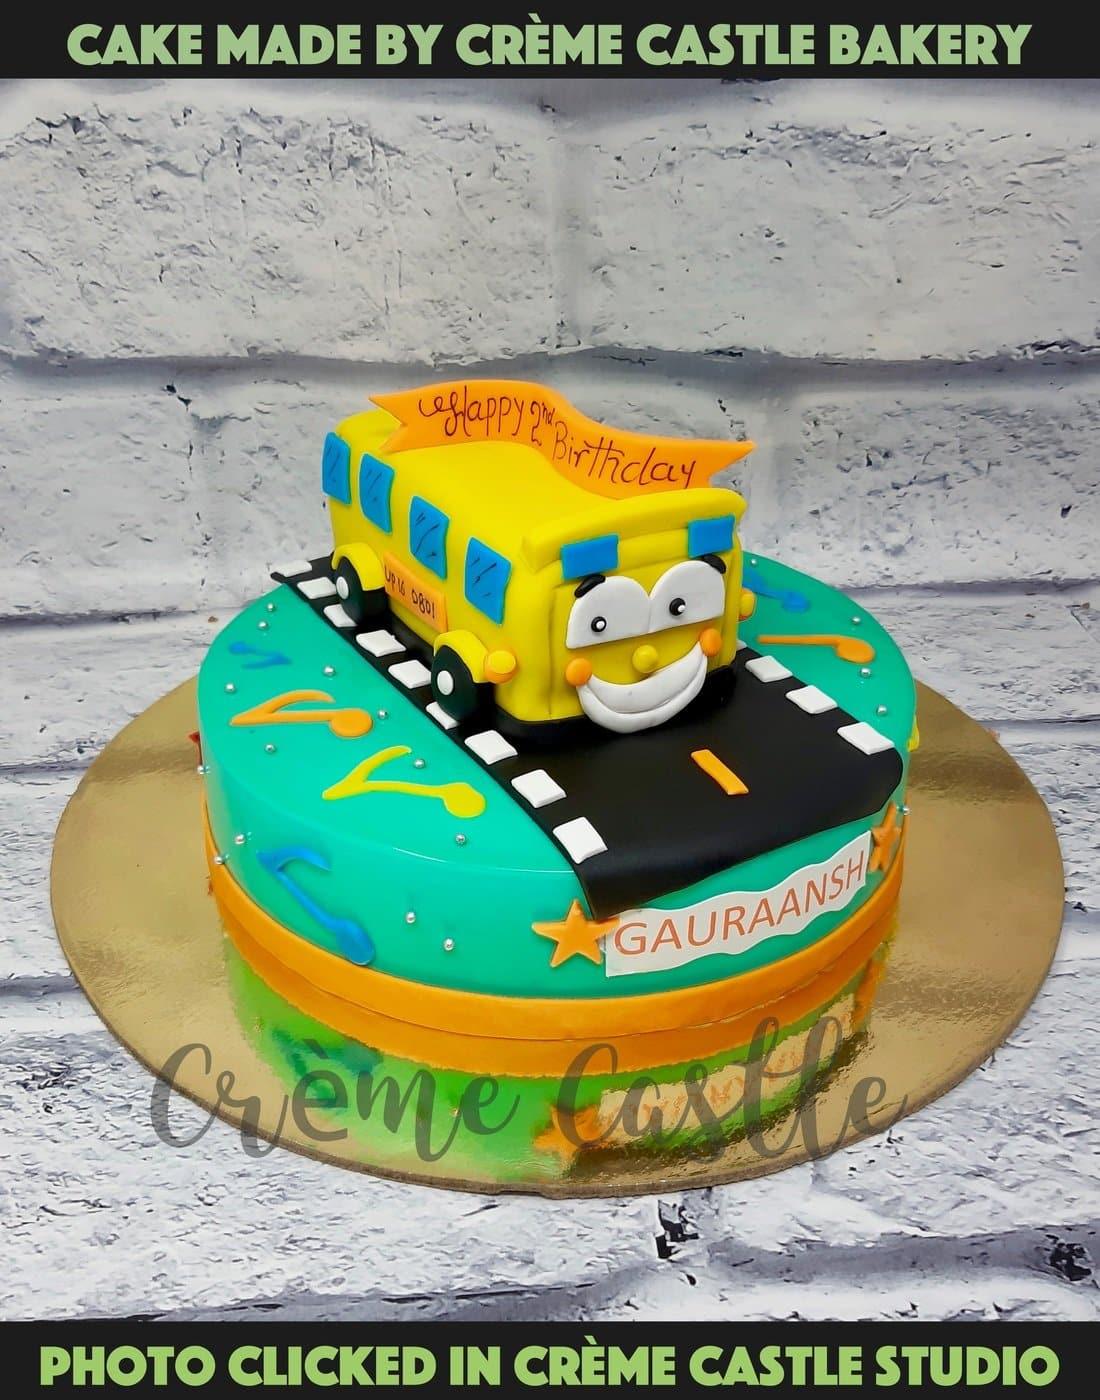 Wheels on the bus cake for kids birthday - Decorated Cake - CakesDecor